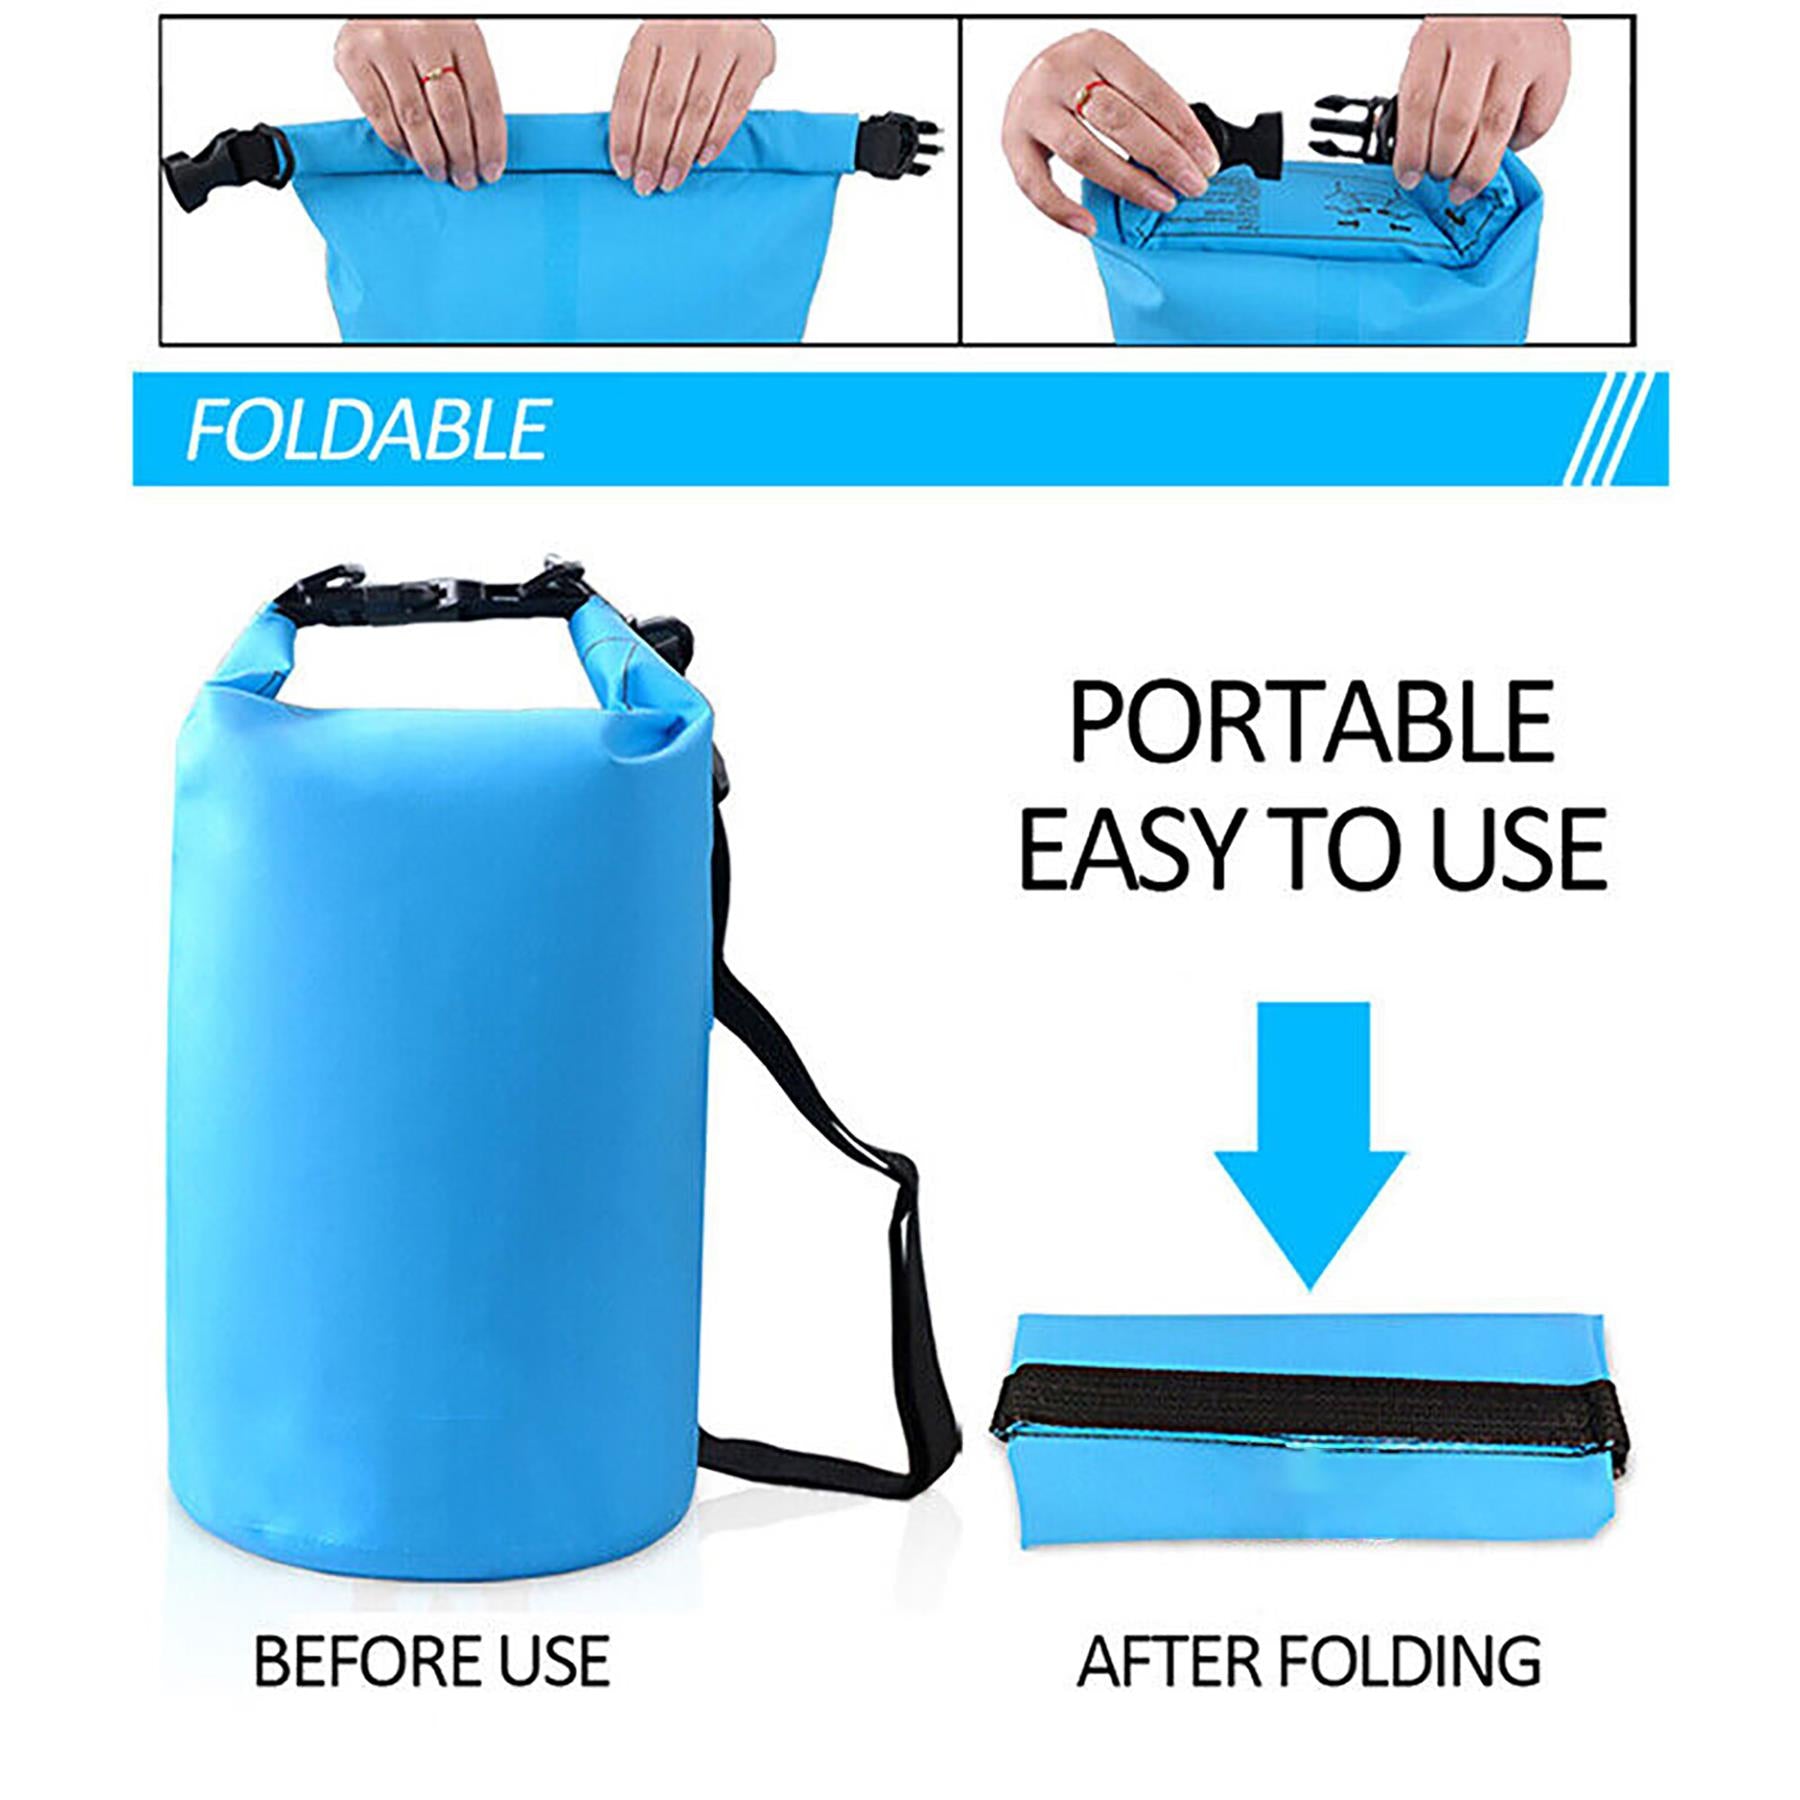 2 LTR WATERPROOF BAG by Geezy - The Magic Toy Shop